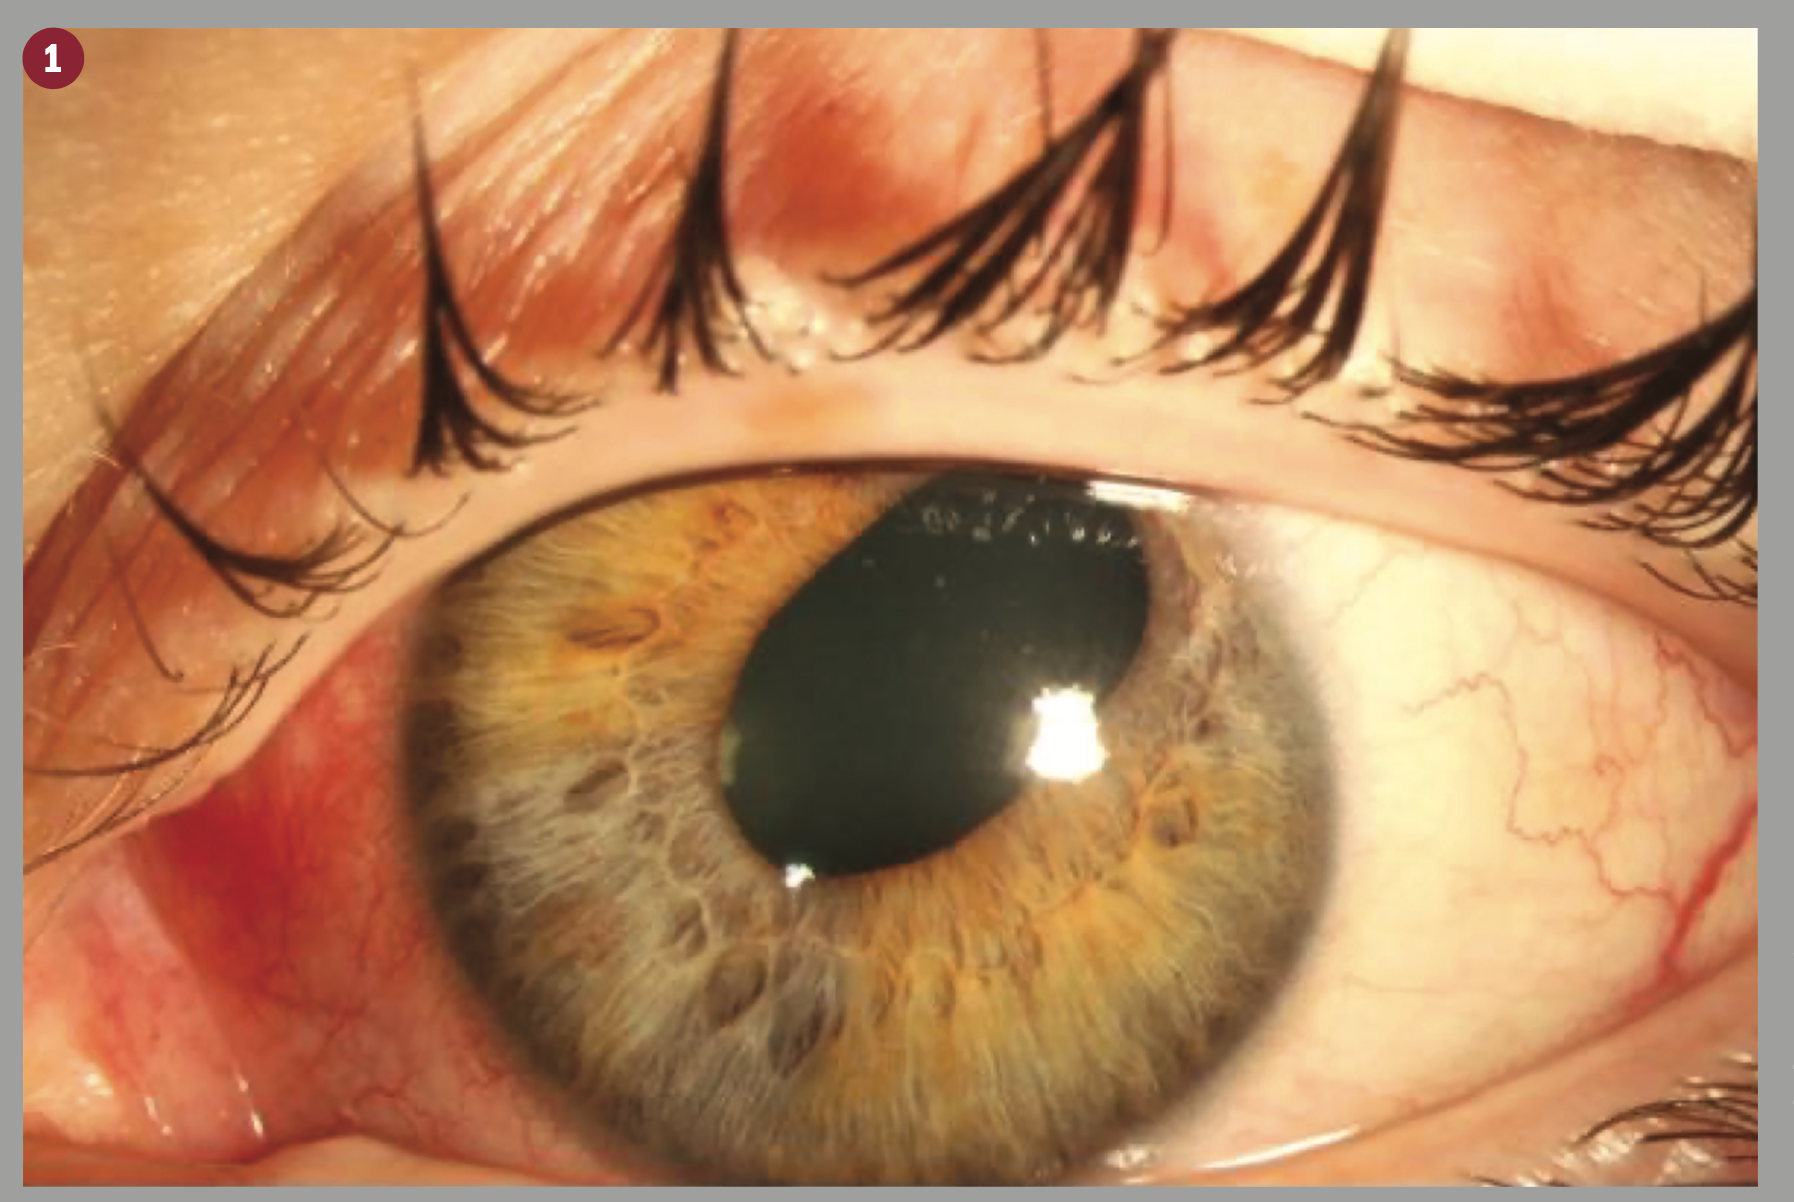 FIGURE 1. The left superotemporal pupil peaking and inferonasal iris atrophy 3 weeks after three-muscle surgery on the left eye. (Images courtesy of Olivia J. Killeen, MD)